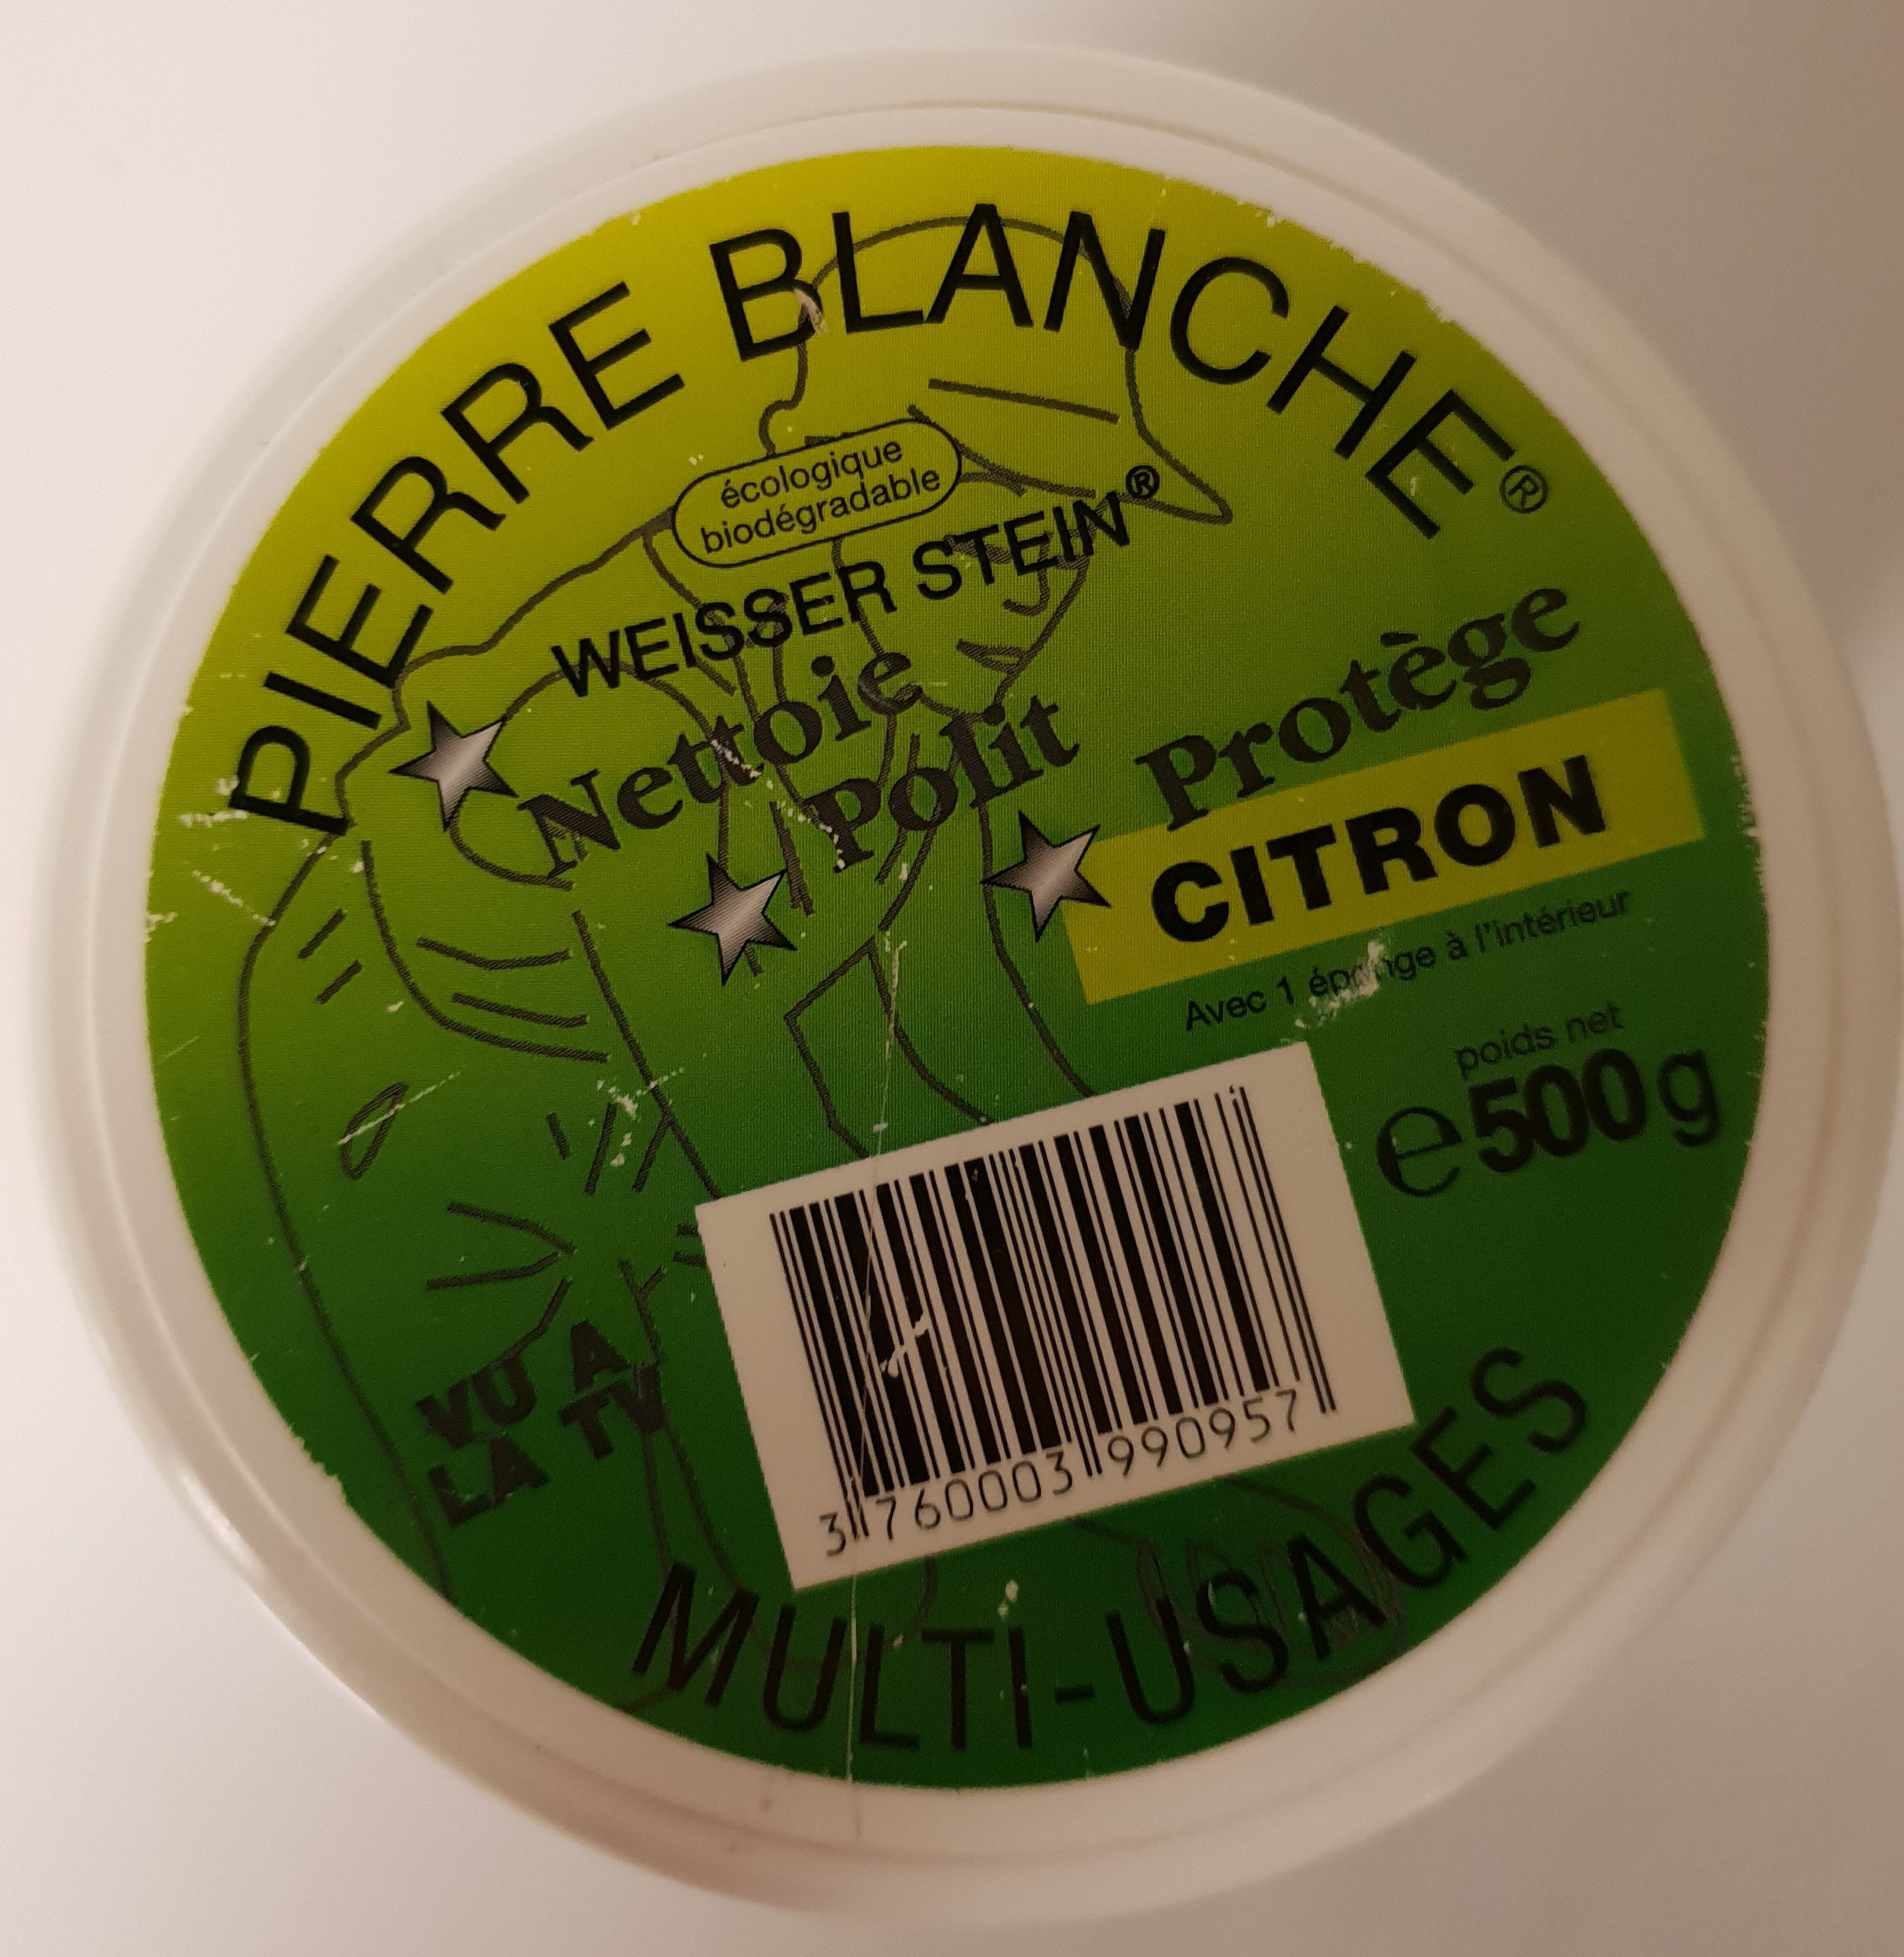 Pierre blanche - Product - fr